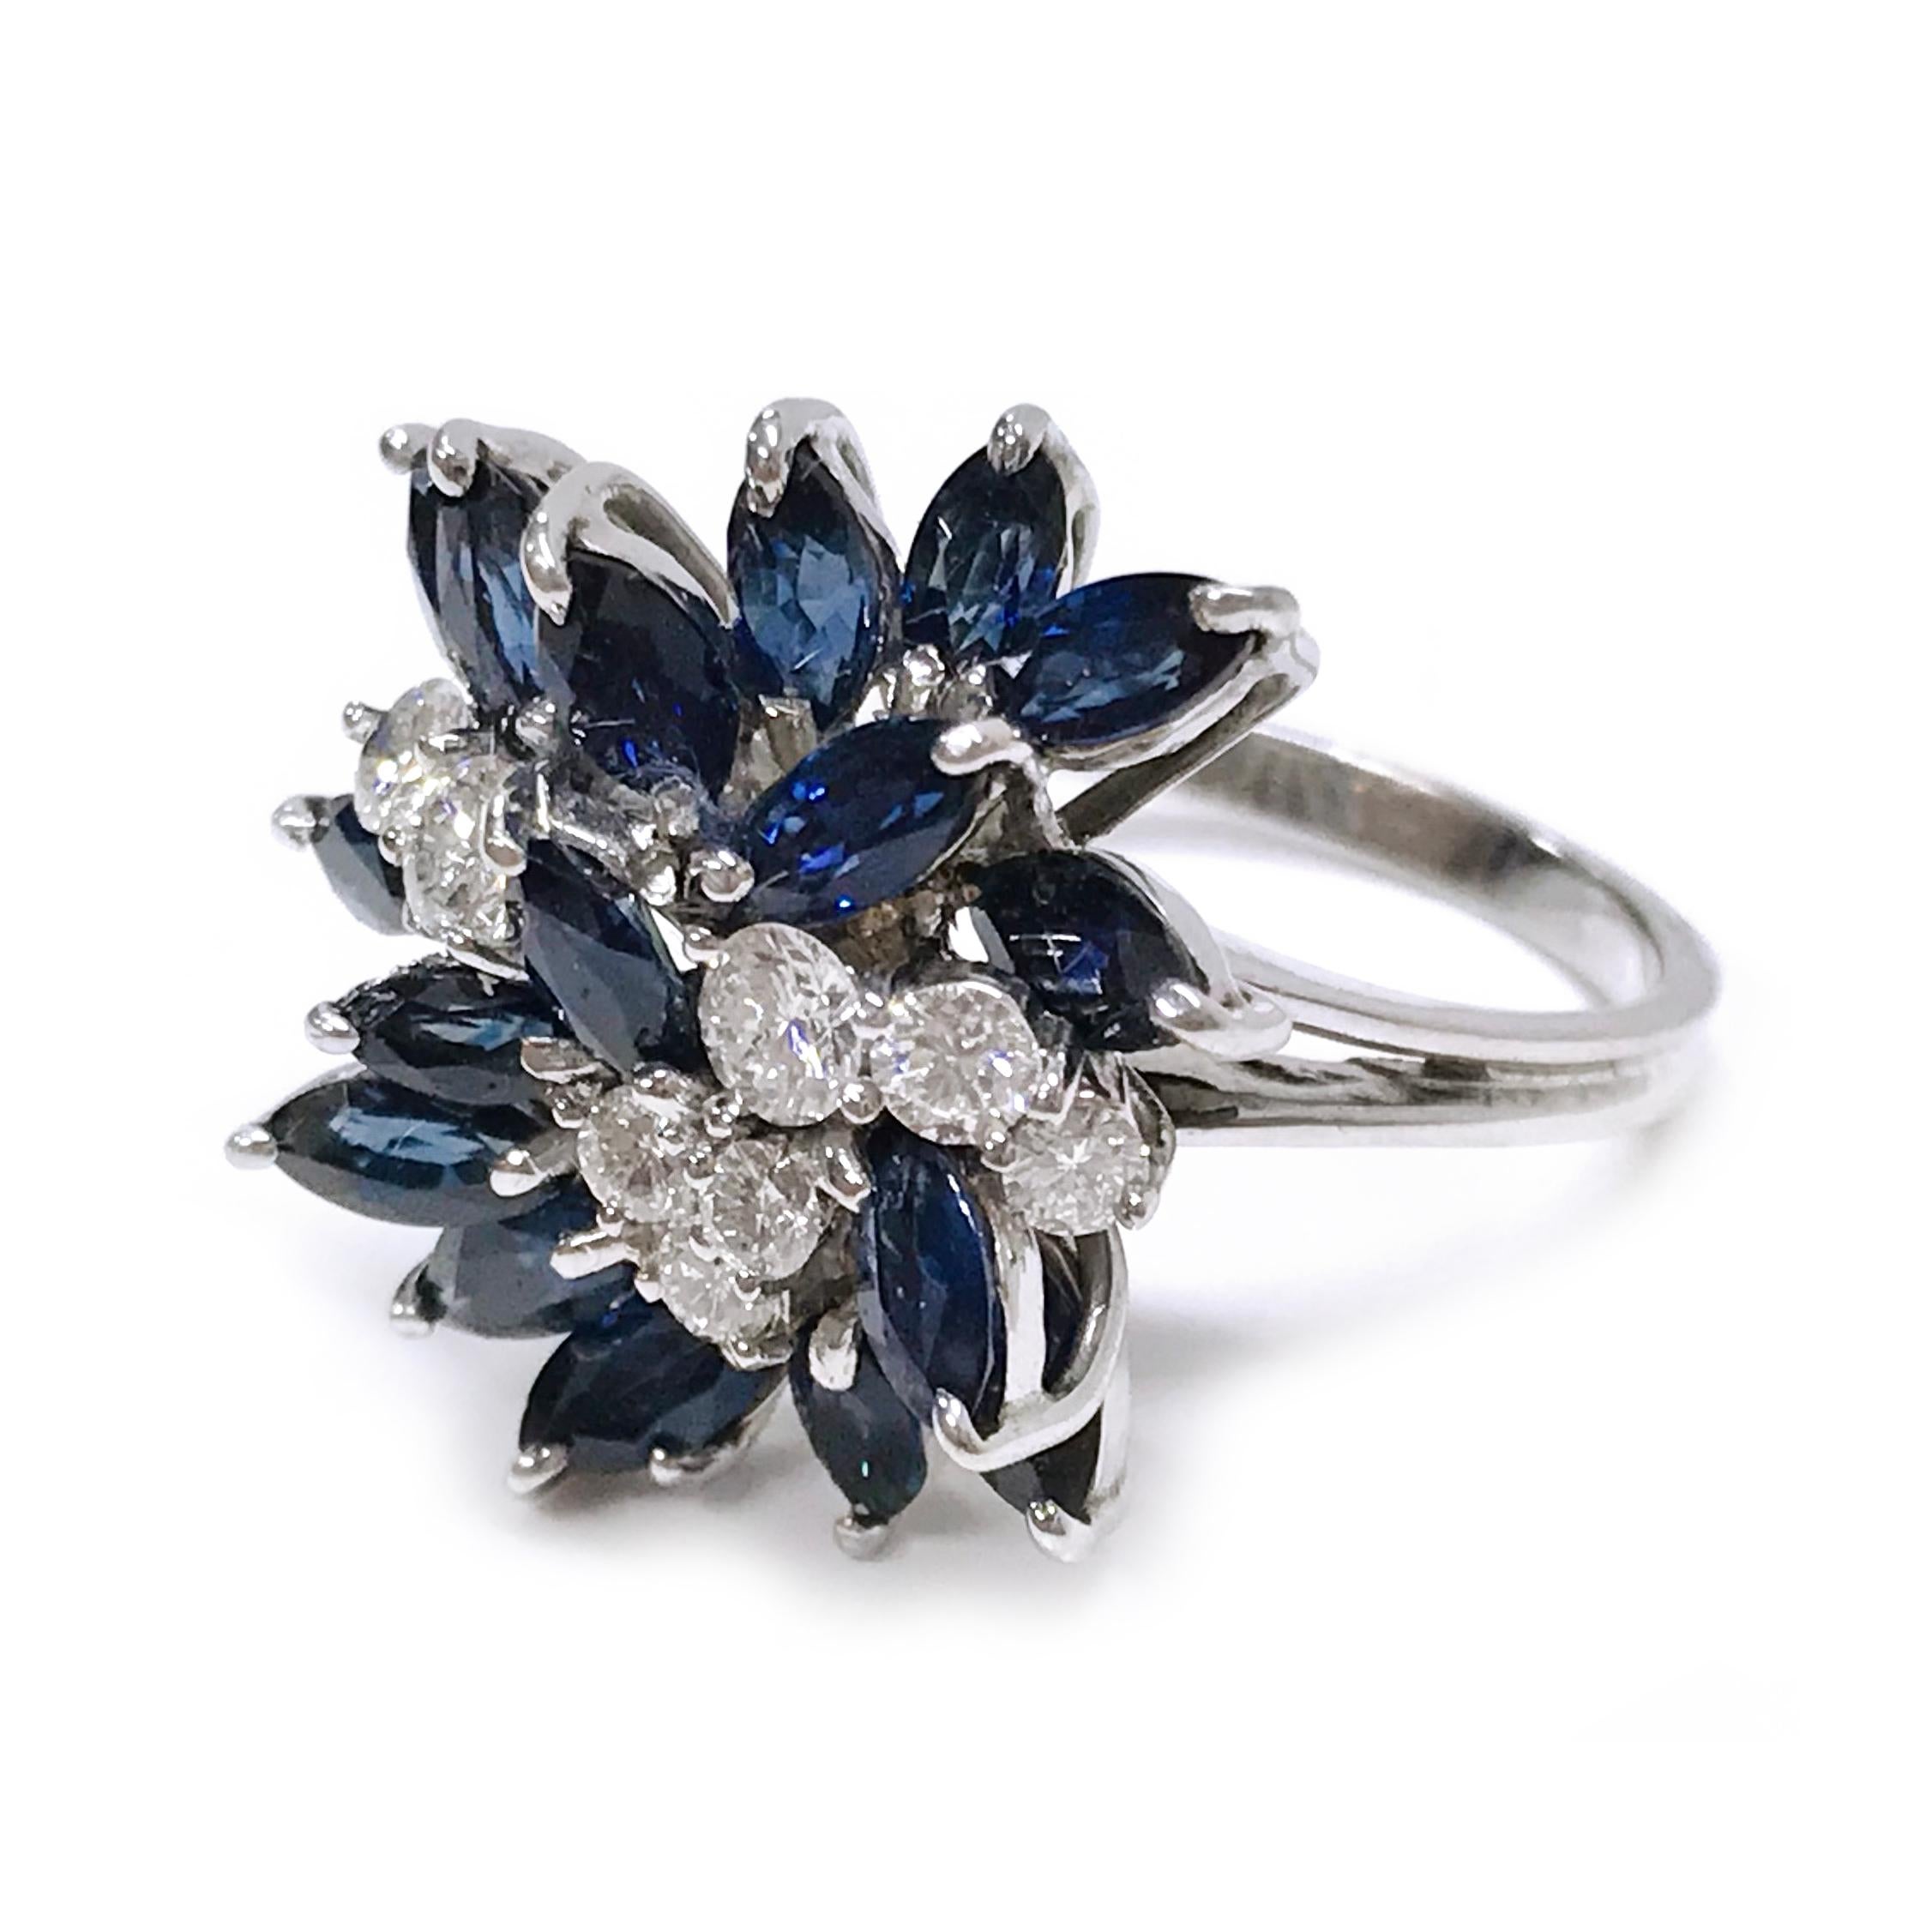 18 Karat White Gold Marquise-Cut Blue Sapphire Diamond Ring. The split ring cluster ring features seventeen marquise-cut blue sapphires and eight round diamonds, all stones are prong-set in white gold. The total carat weight of the sapphires is